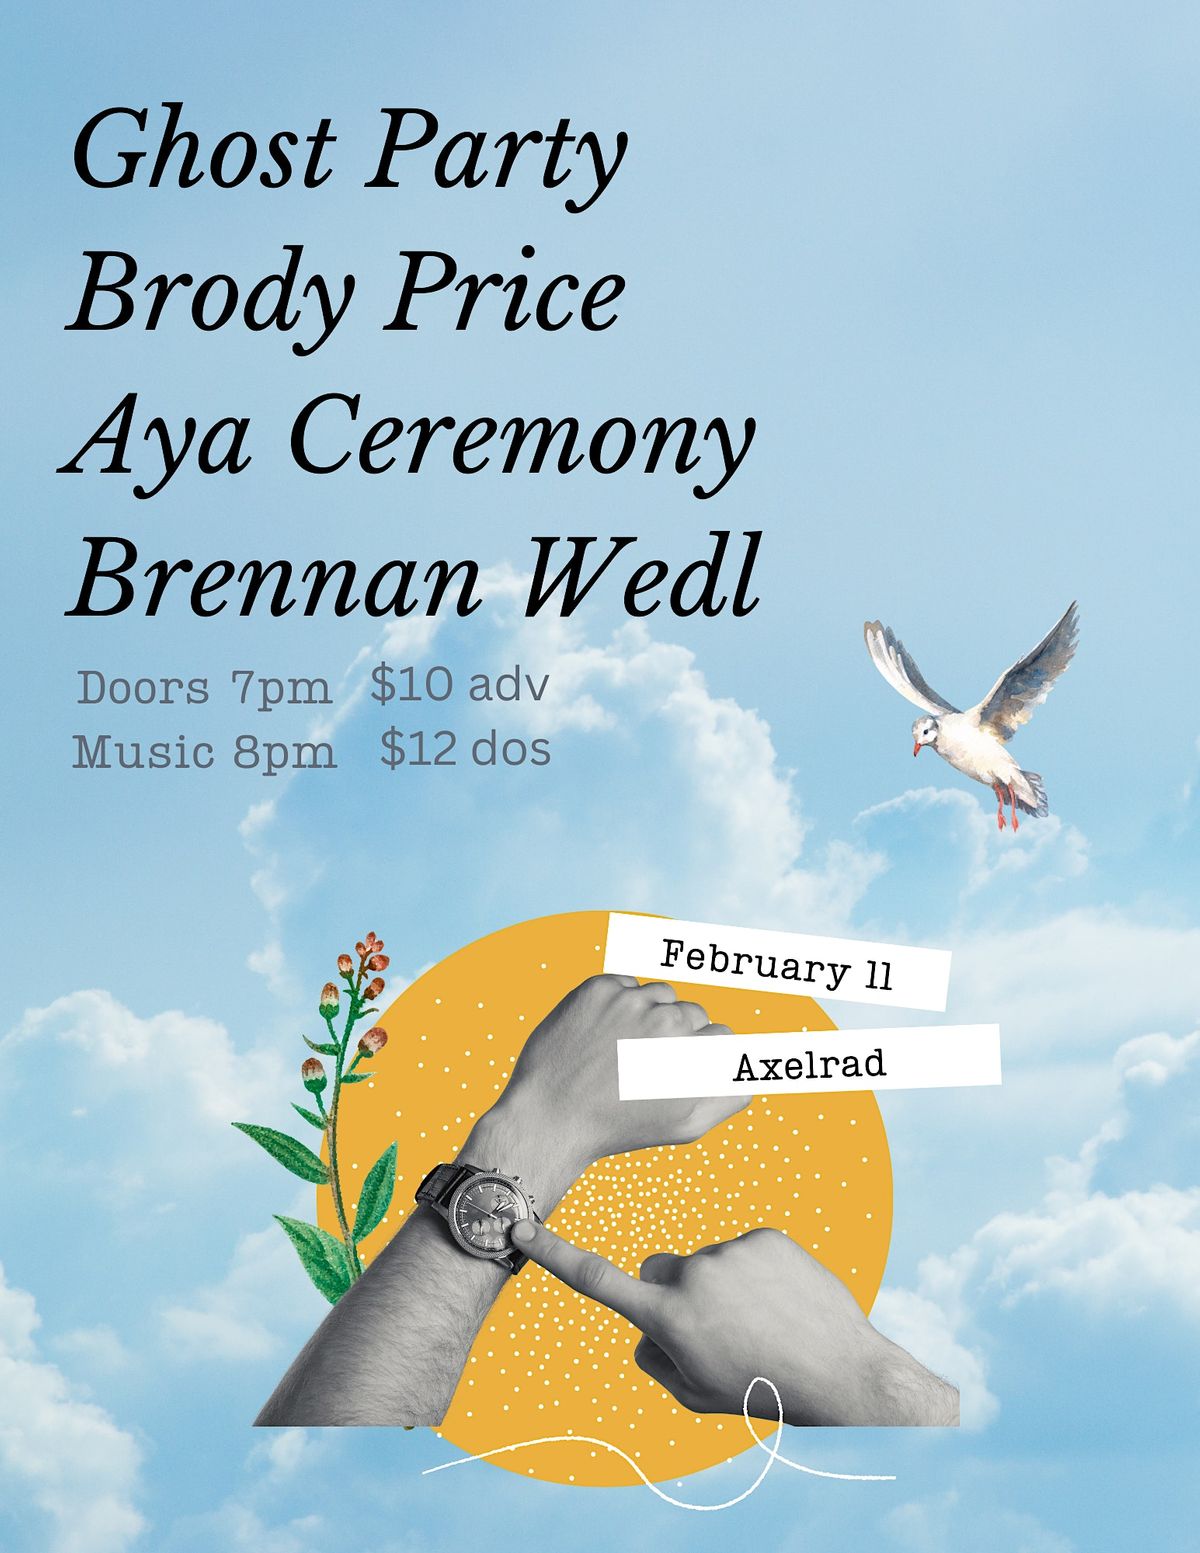 GHOST PARTY, BRODY PRICE, BRENNAN WEDL live at Axelrad Upstairs